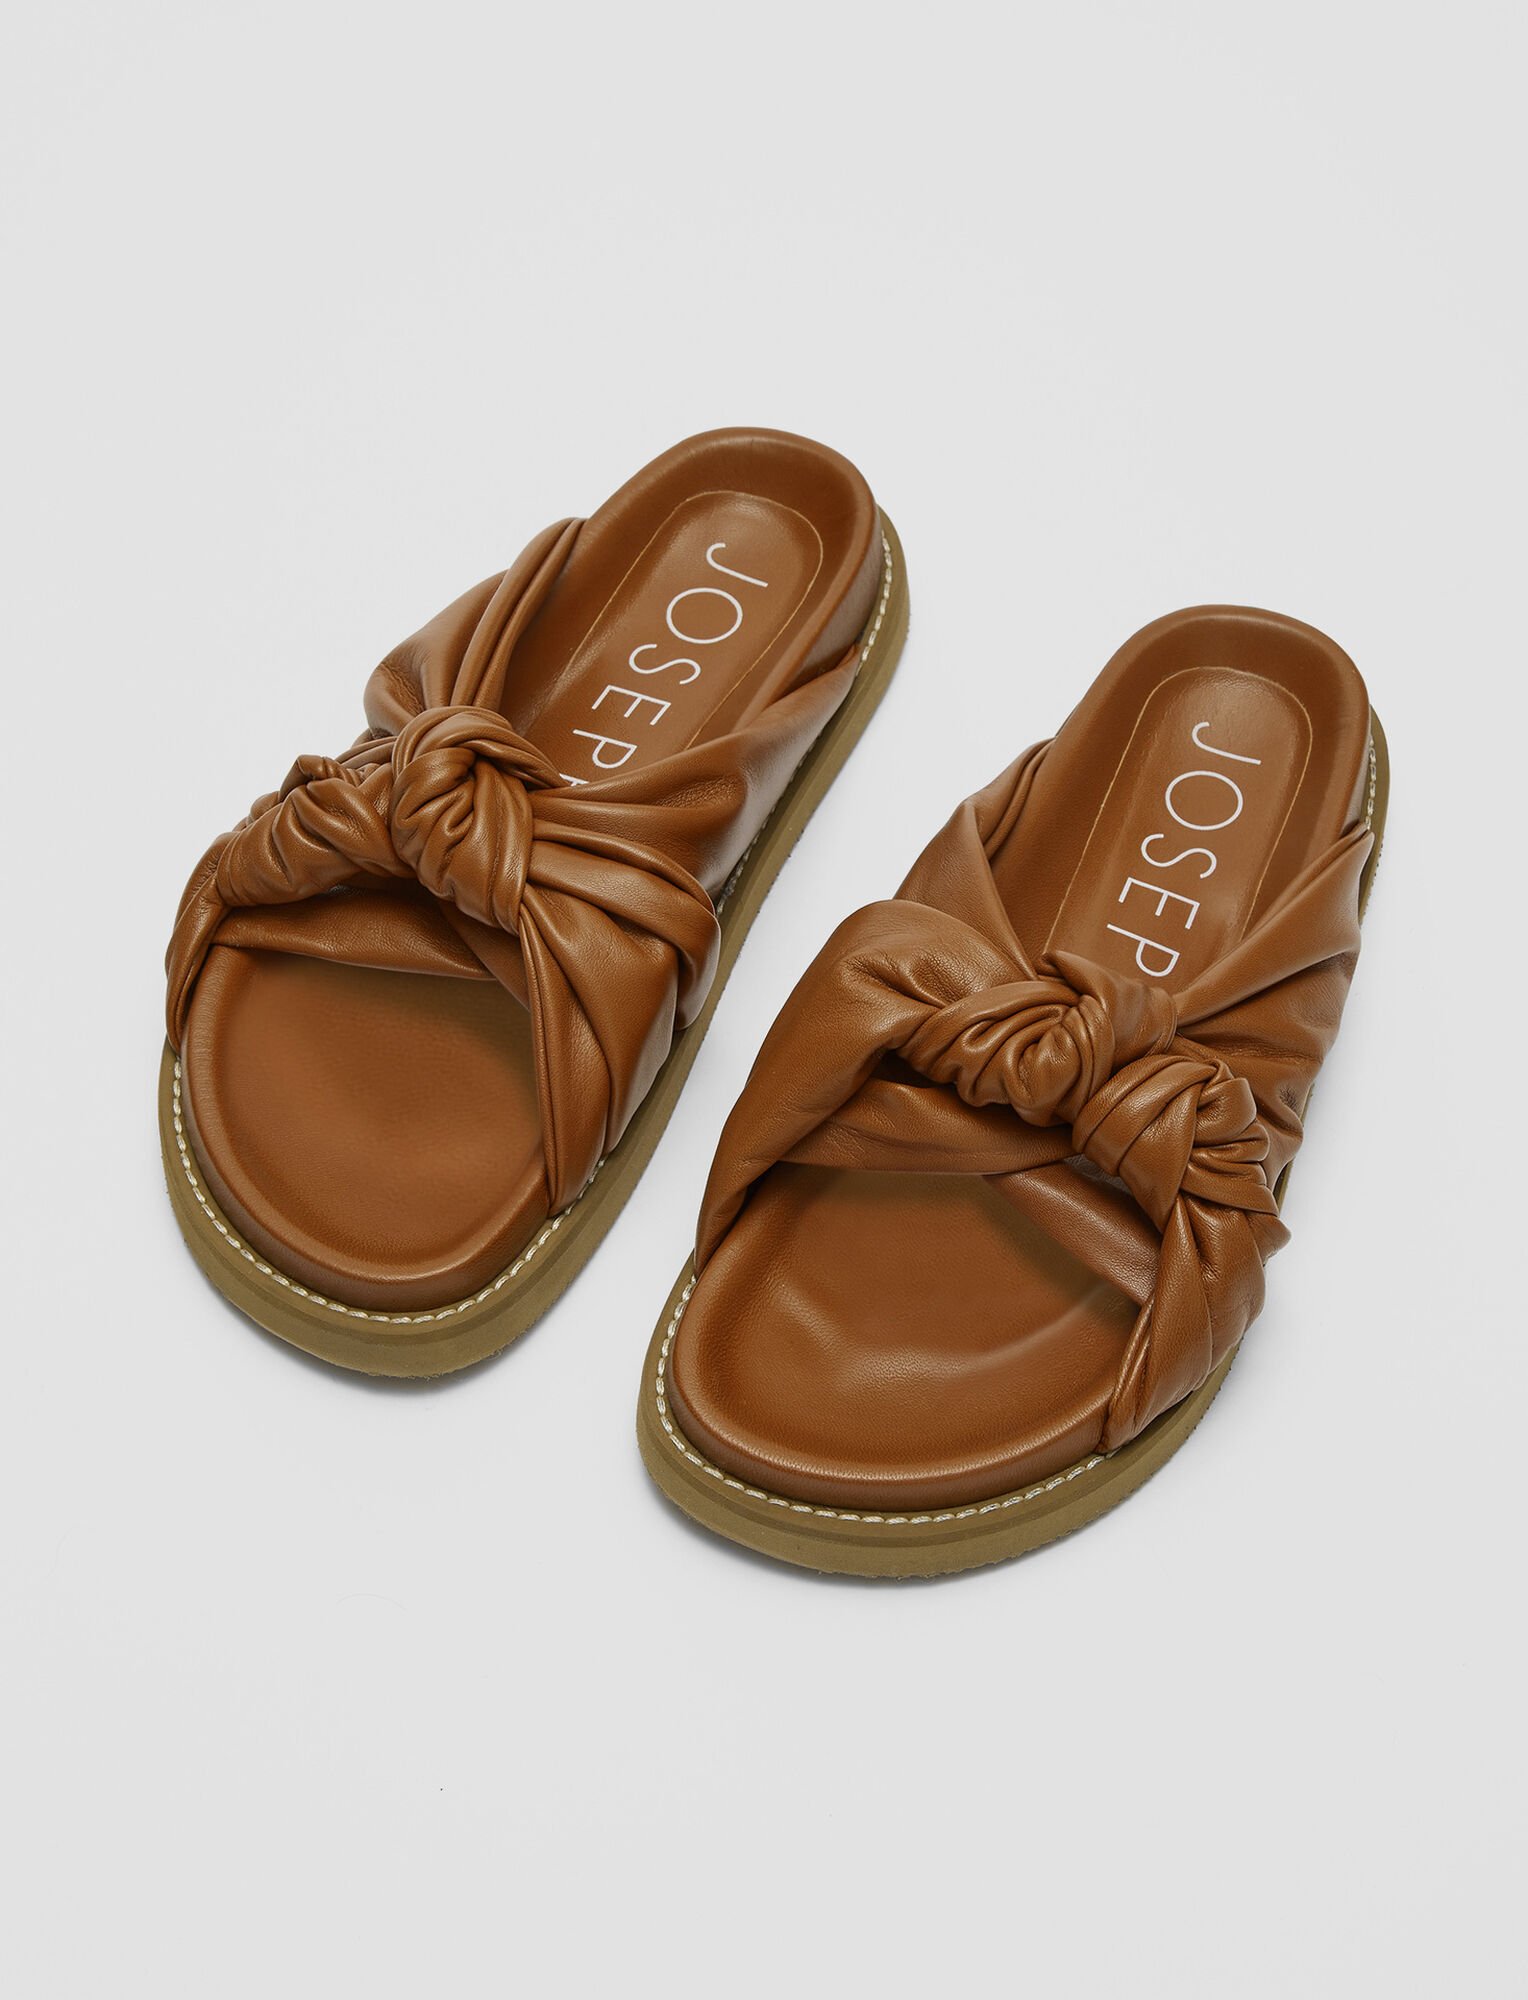 Joseph, Leather Big Knot Sandals, in Camel